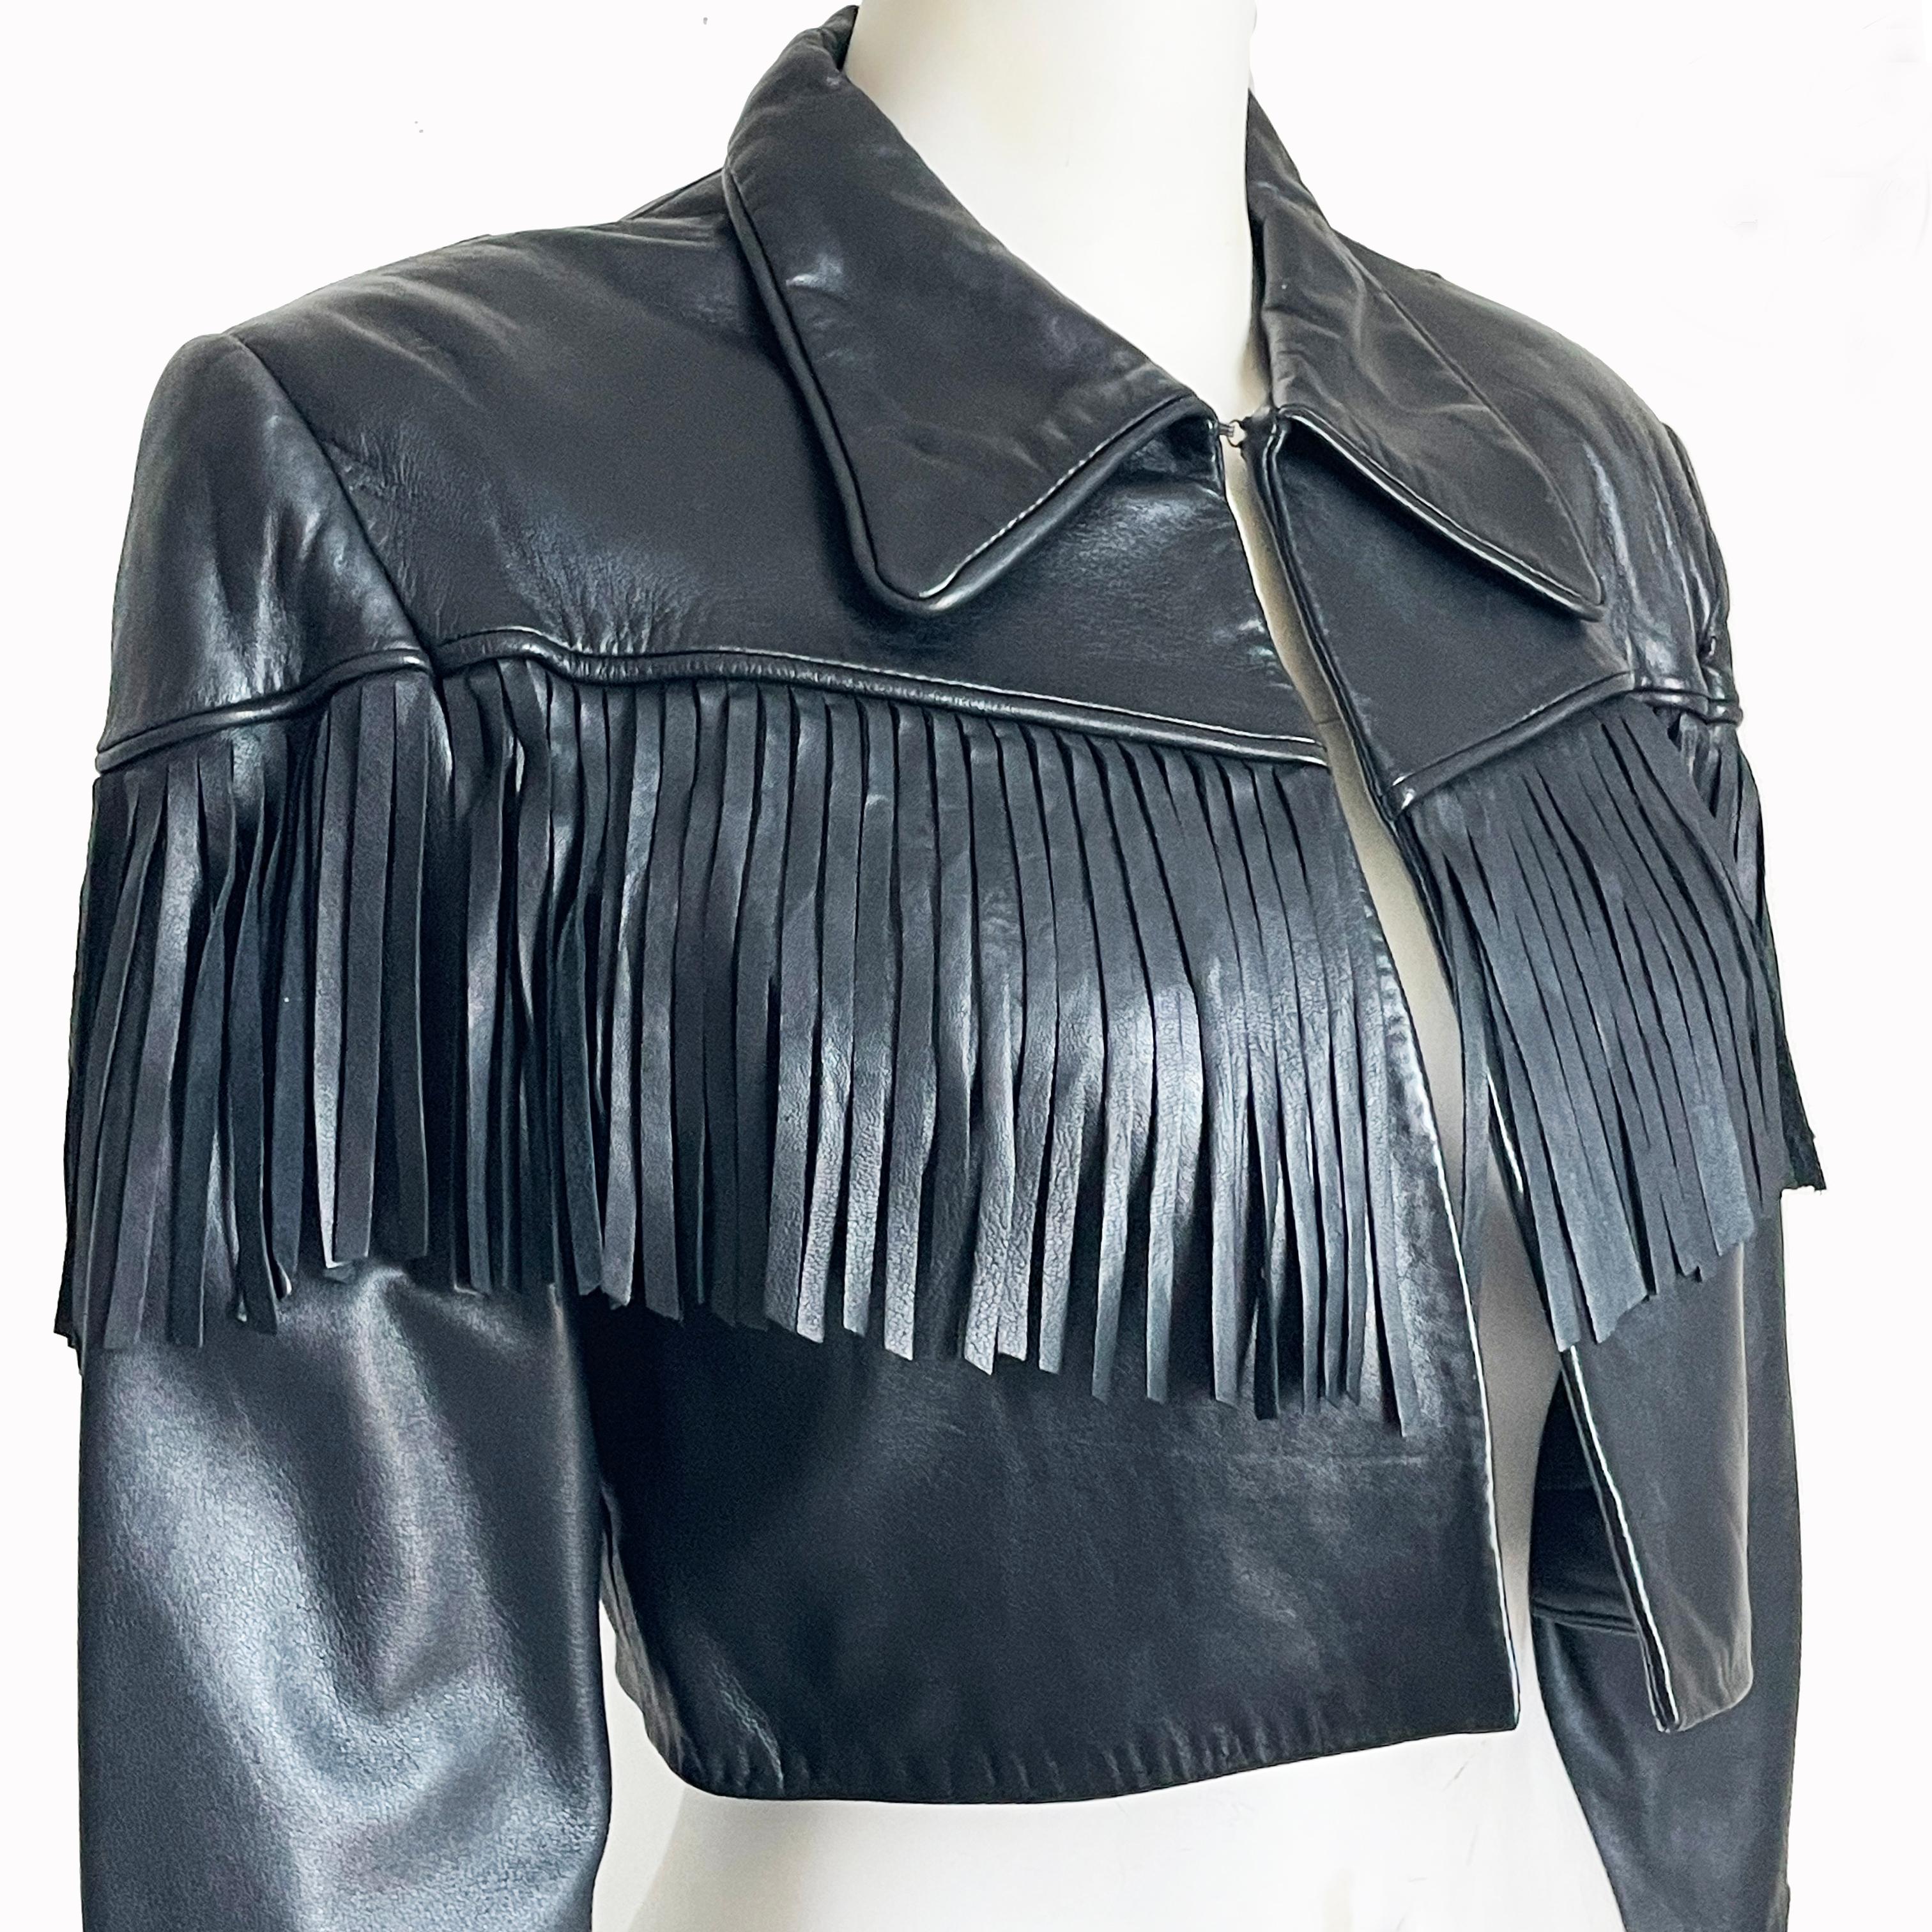 Norma Kamali Leather Jacket Black Cropped Fringe Vintage 1990s Rare Rocker Chic In Good Condition For Sale In Port Saint Lucie, FL